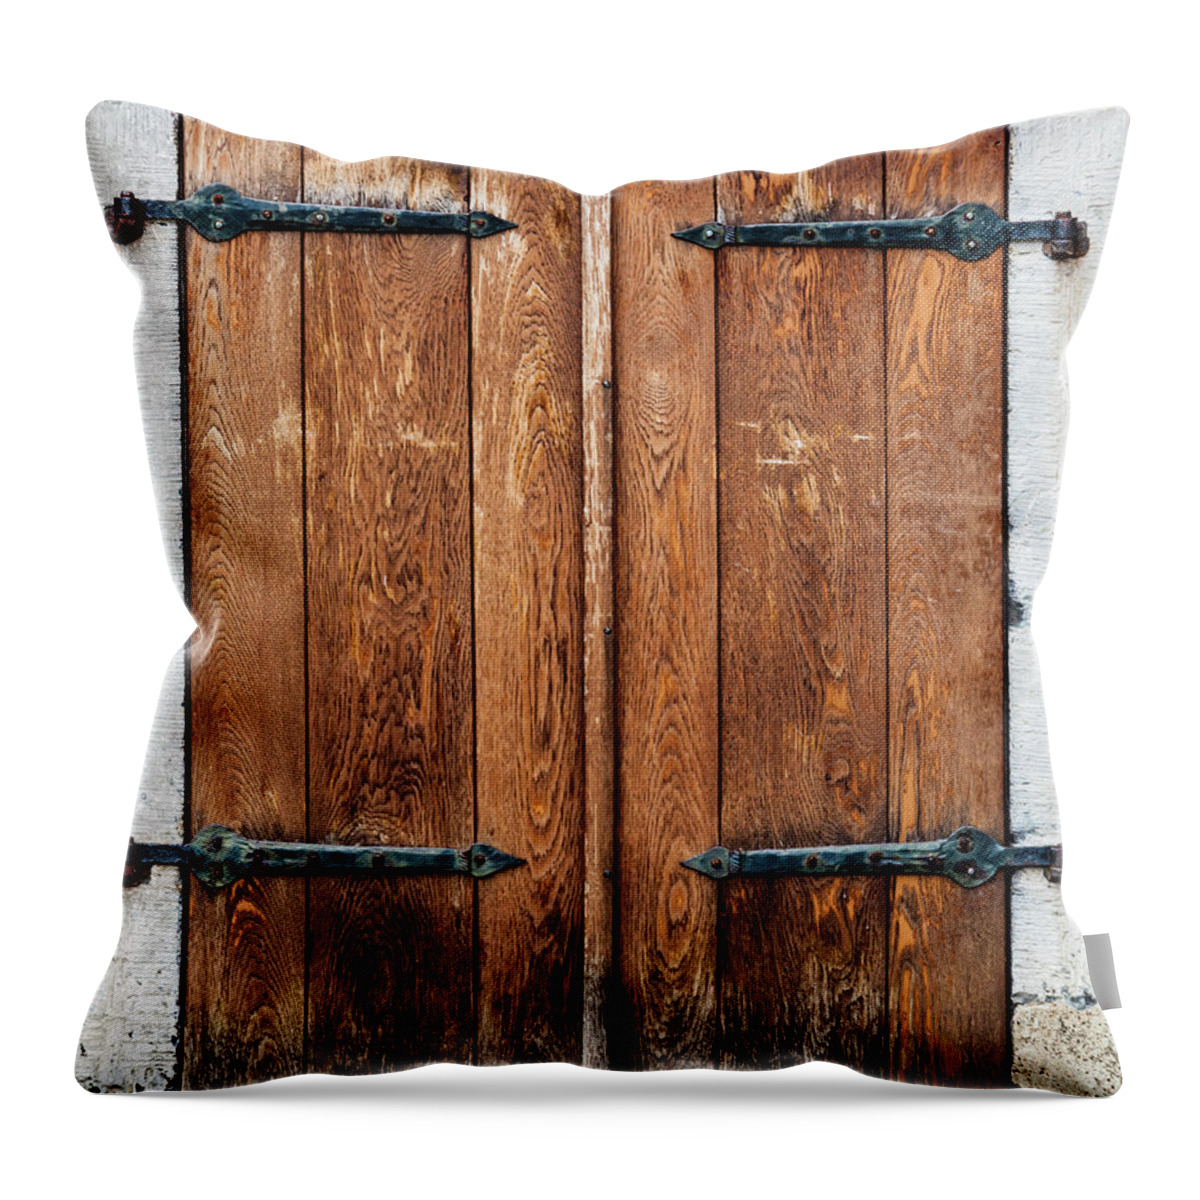 Handle Throw Pillow featuring the photograph House Door by Ewastudio